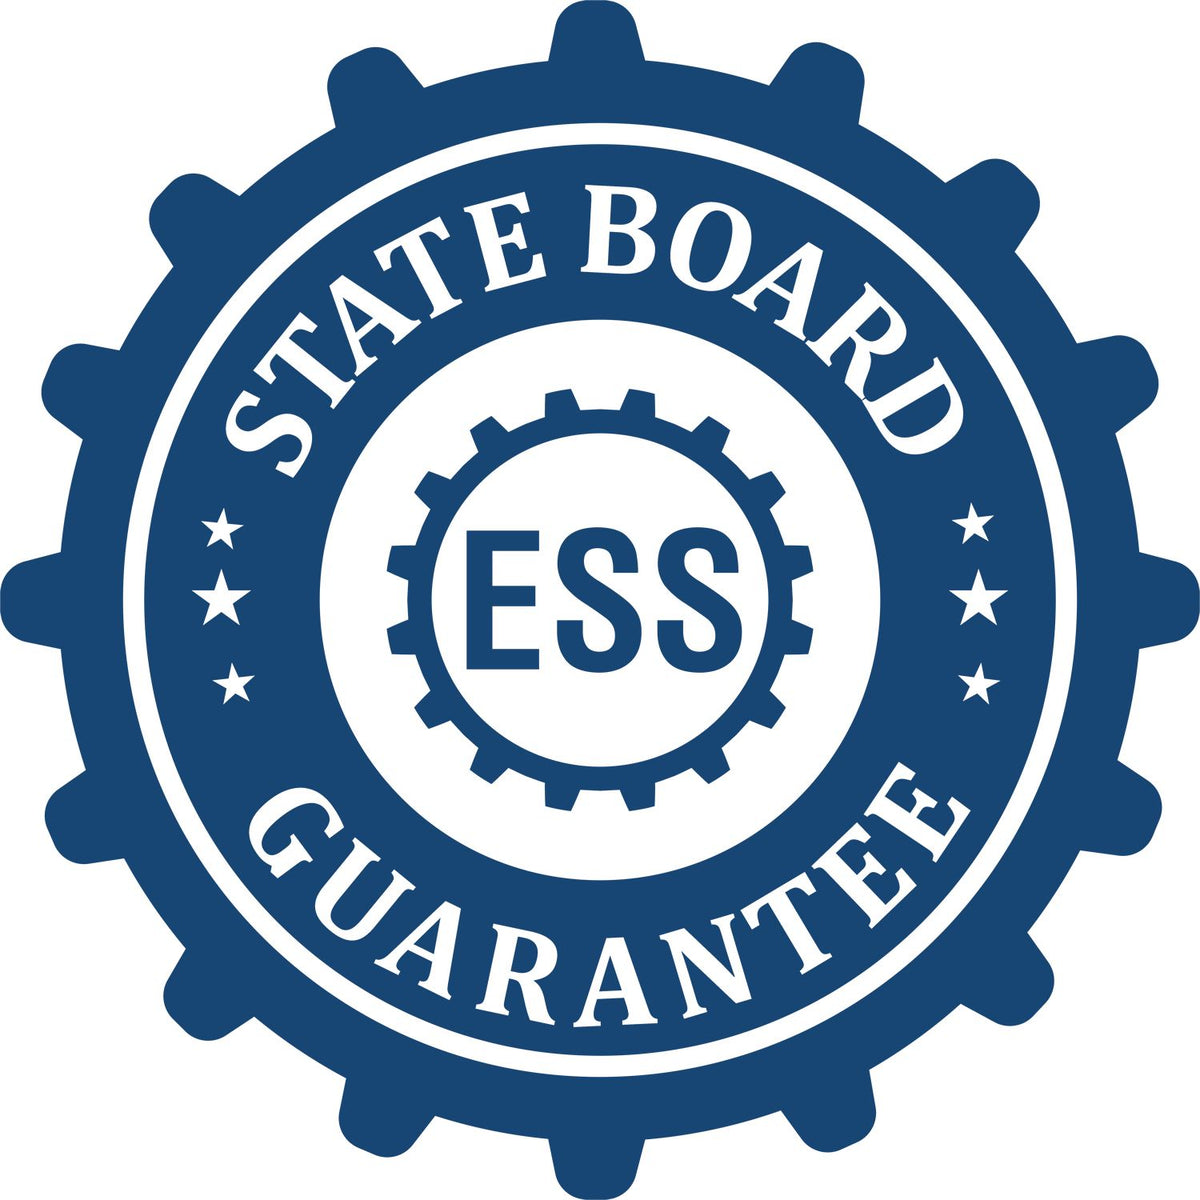 An emblem in a gear shape illustrating a state board guarantee for the MaxLight Premium Pre-Inked Indiana Rectangular Notarial Stamp product.